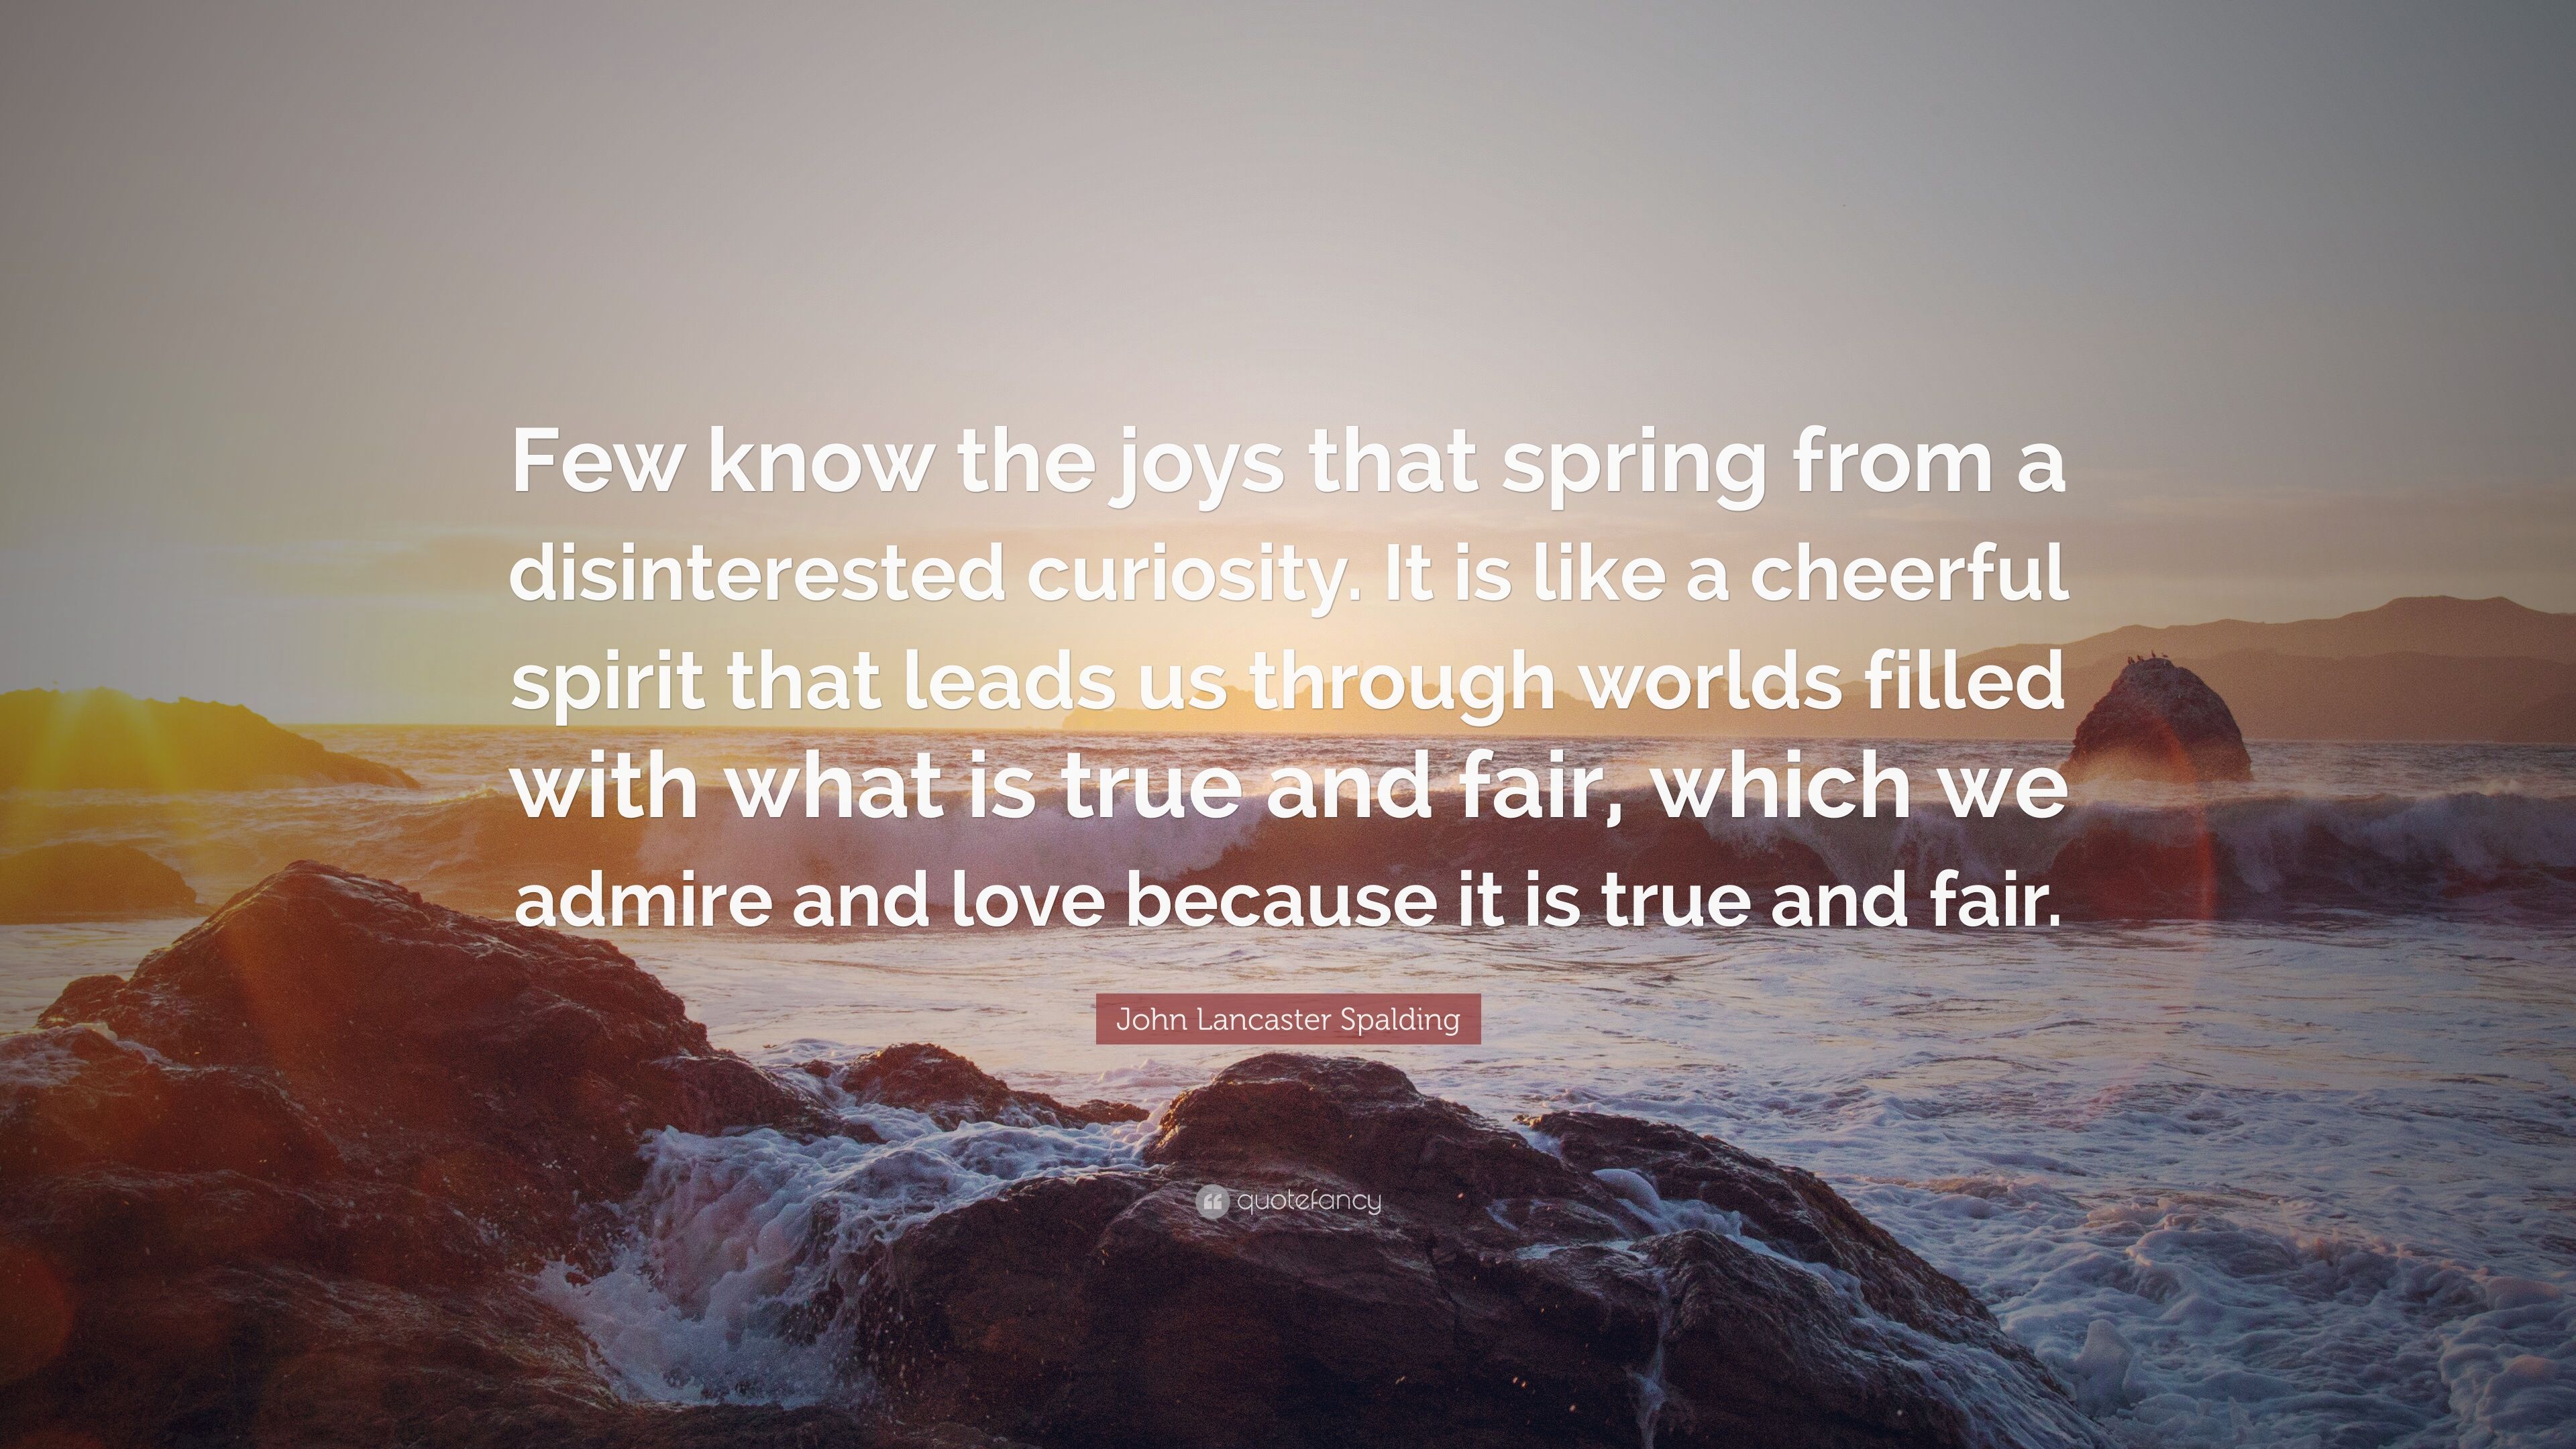 John Lancaster Spalding Quote: “Few know the joys that spring